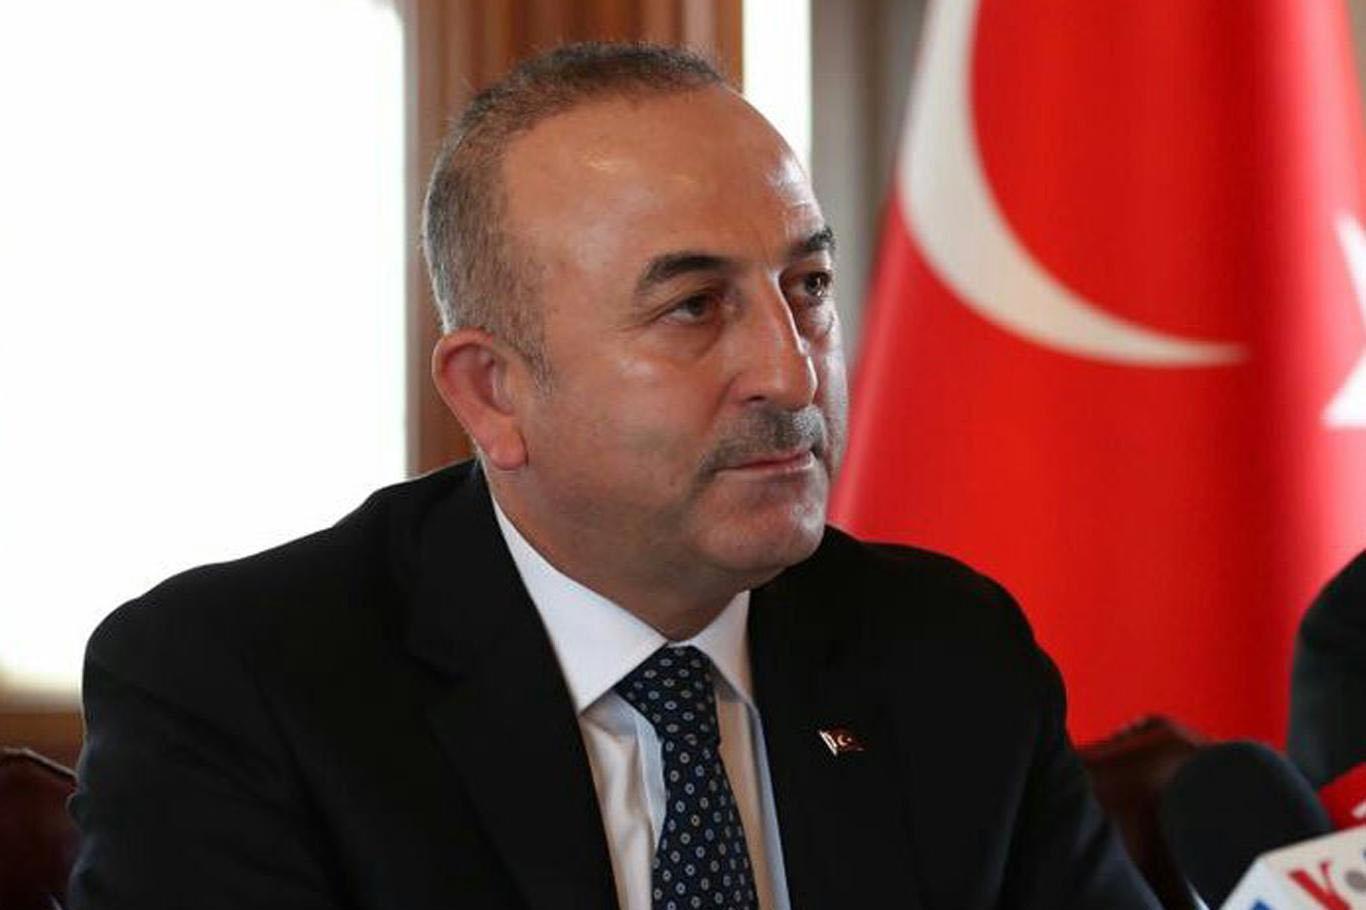 Turkey to resume operation if YPG/PKK fails to withdraw, Foreign Minister says